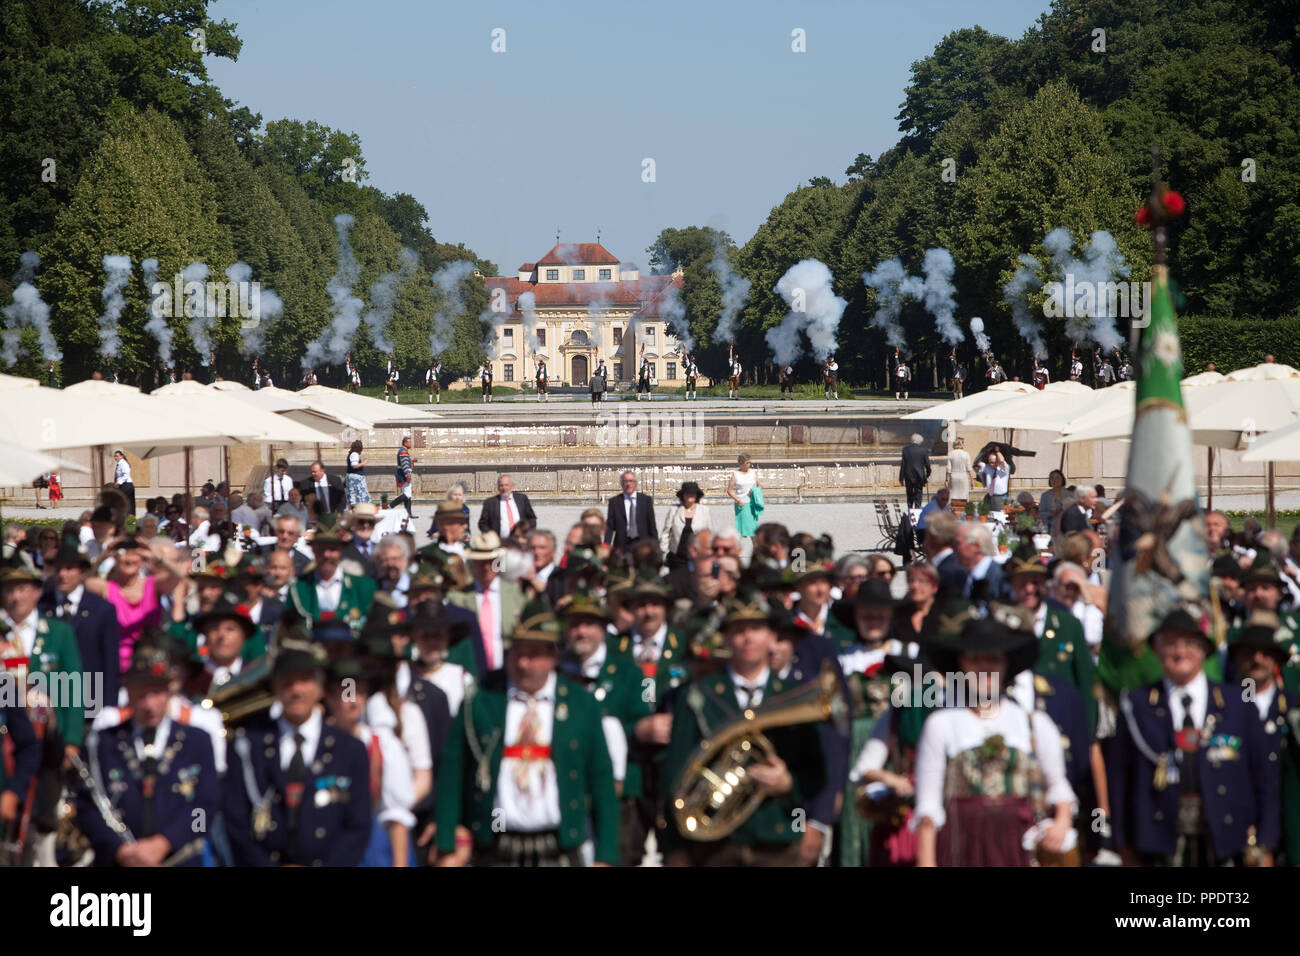 Gun salute at the reception of His Royal Highness Franz Duke of Bavaria on the occasion of his 80th birthday in Schleissheim Palace. Stock Photo